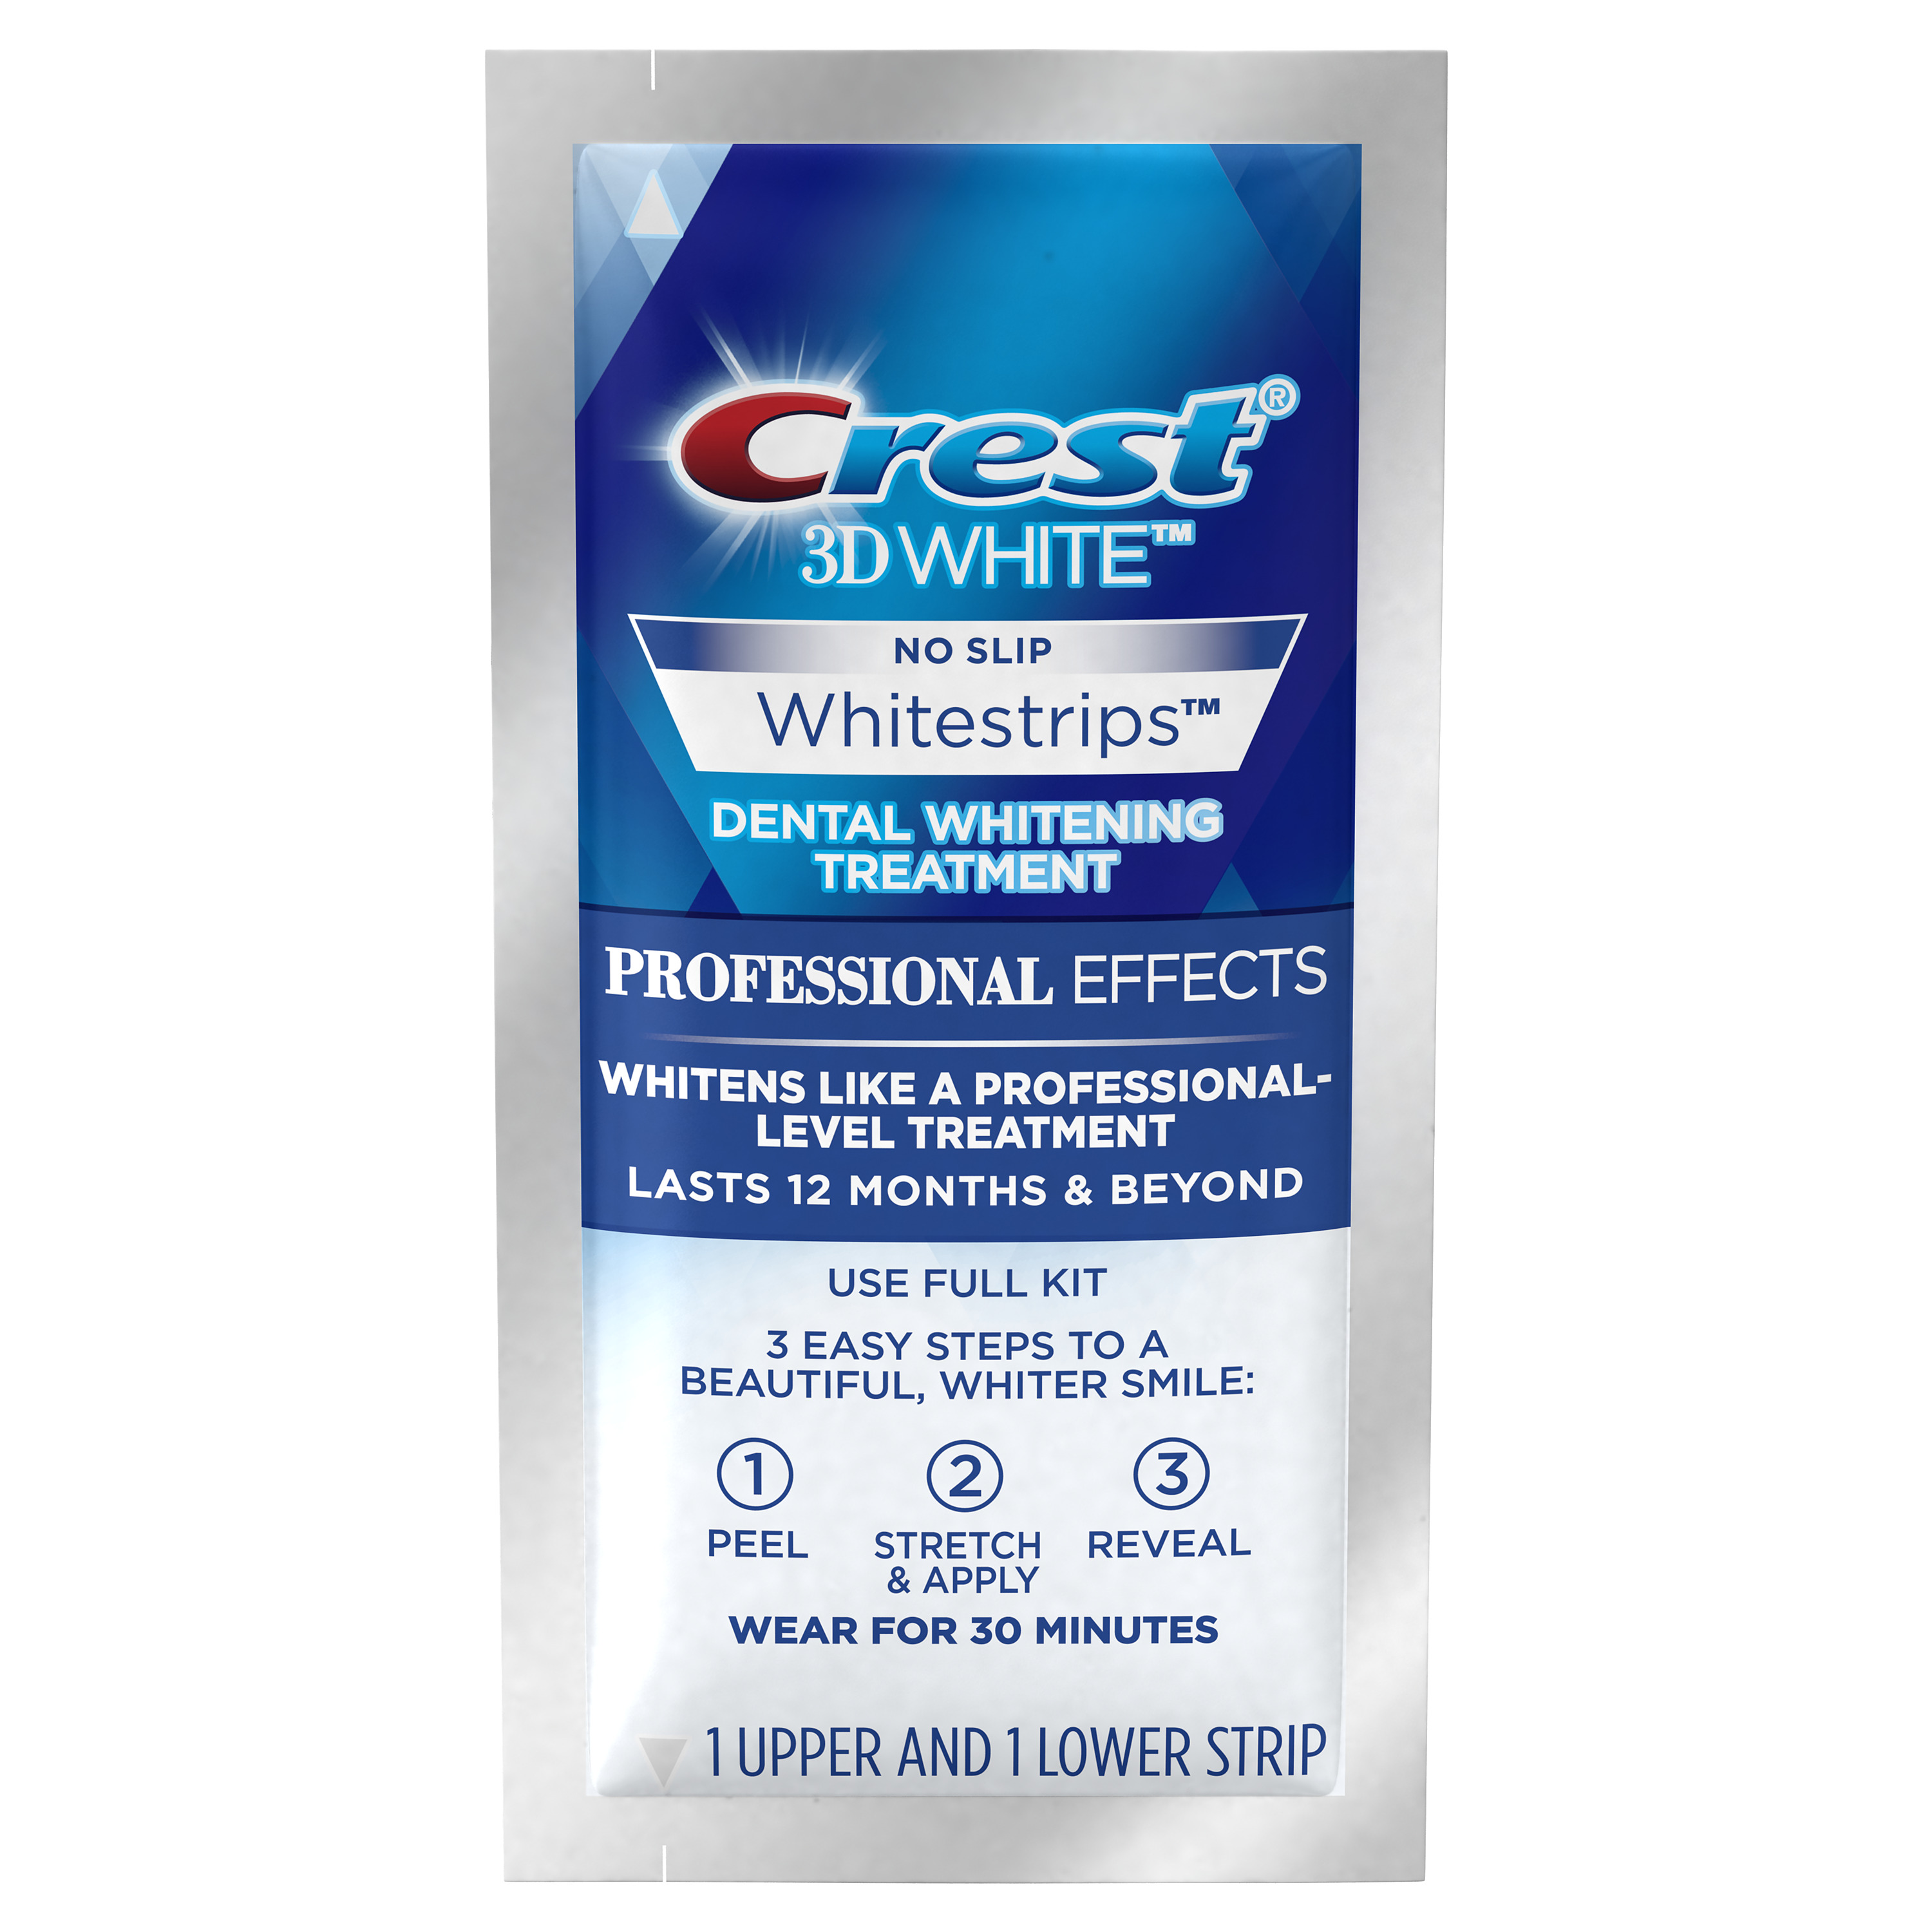 Crest 3D White Professional Effects Whitening Teeth Strips Kit, 40 Treatments (2 Pack) - image 3 of 7